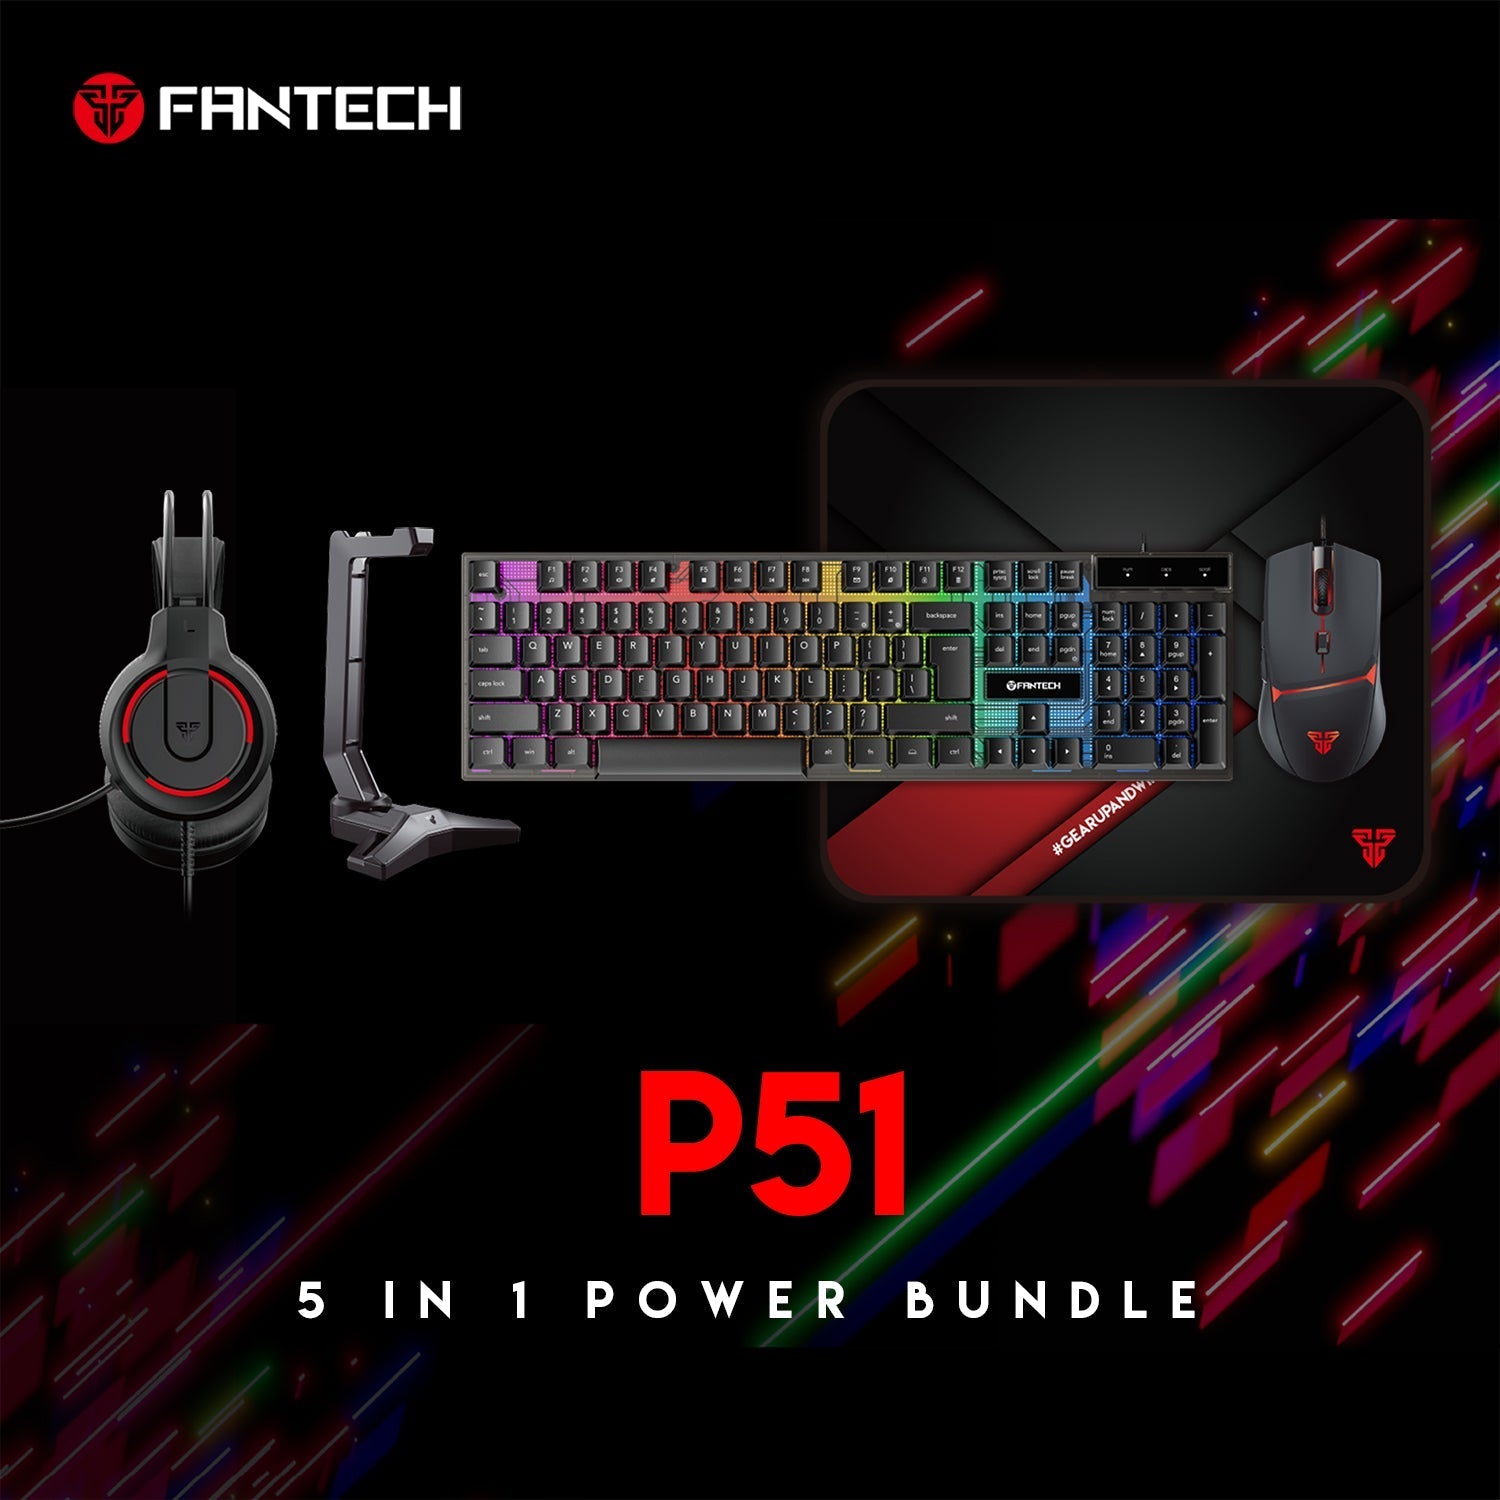 FANTECH P51 Power Bundle Gaming Keyboard and Mouse JOD 30